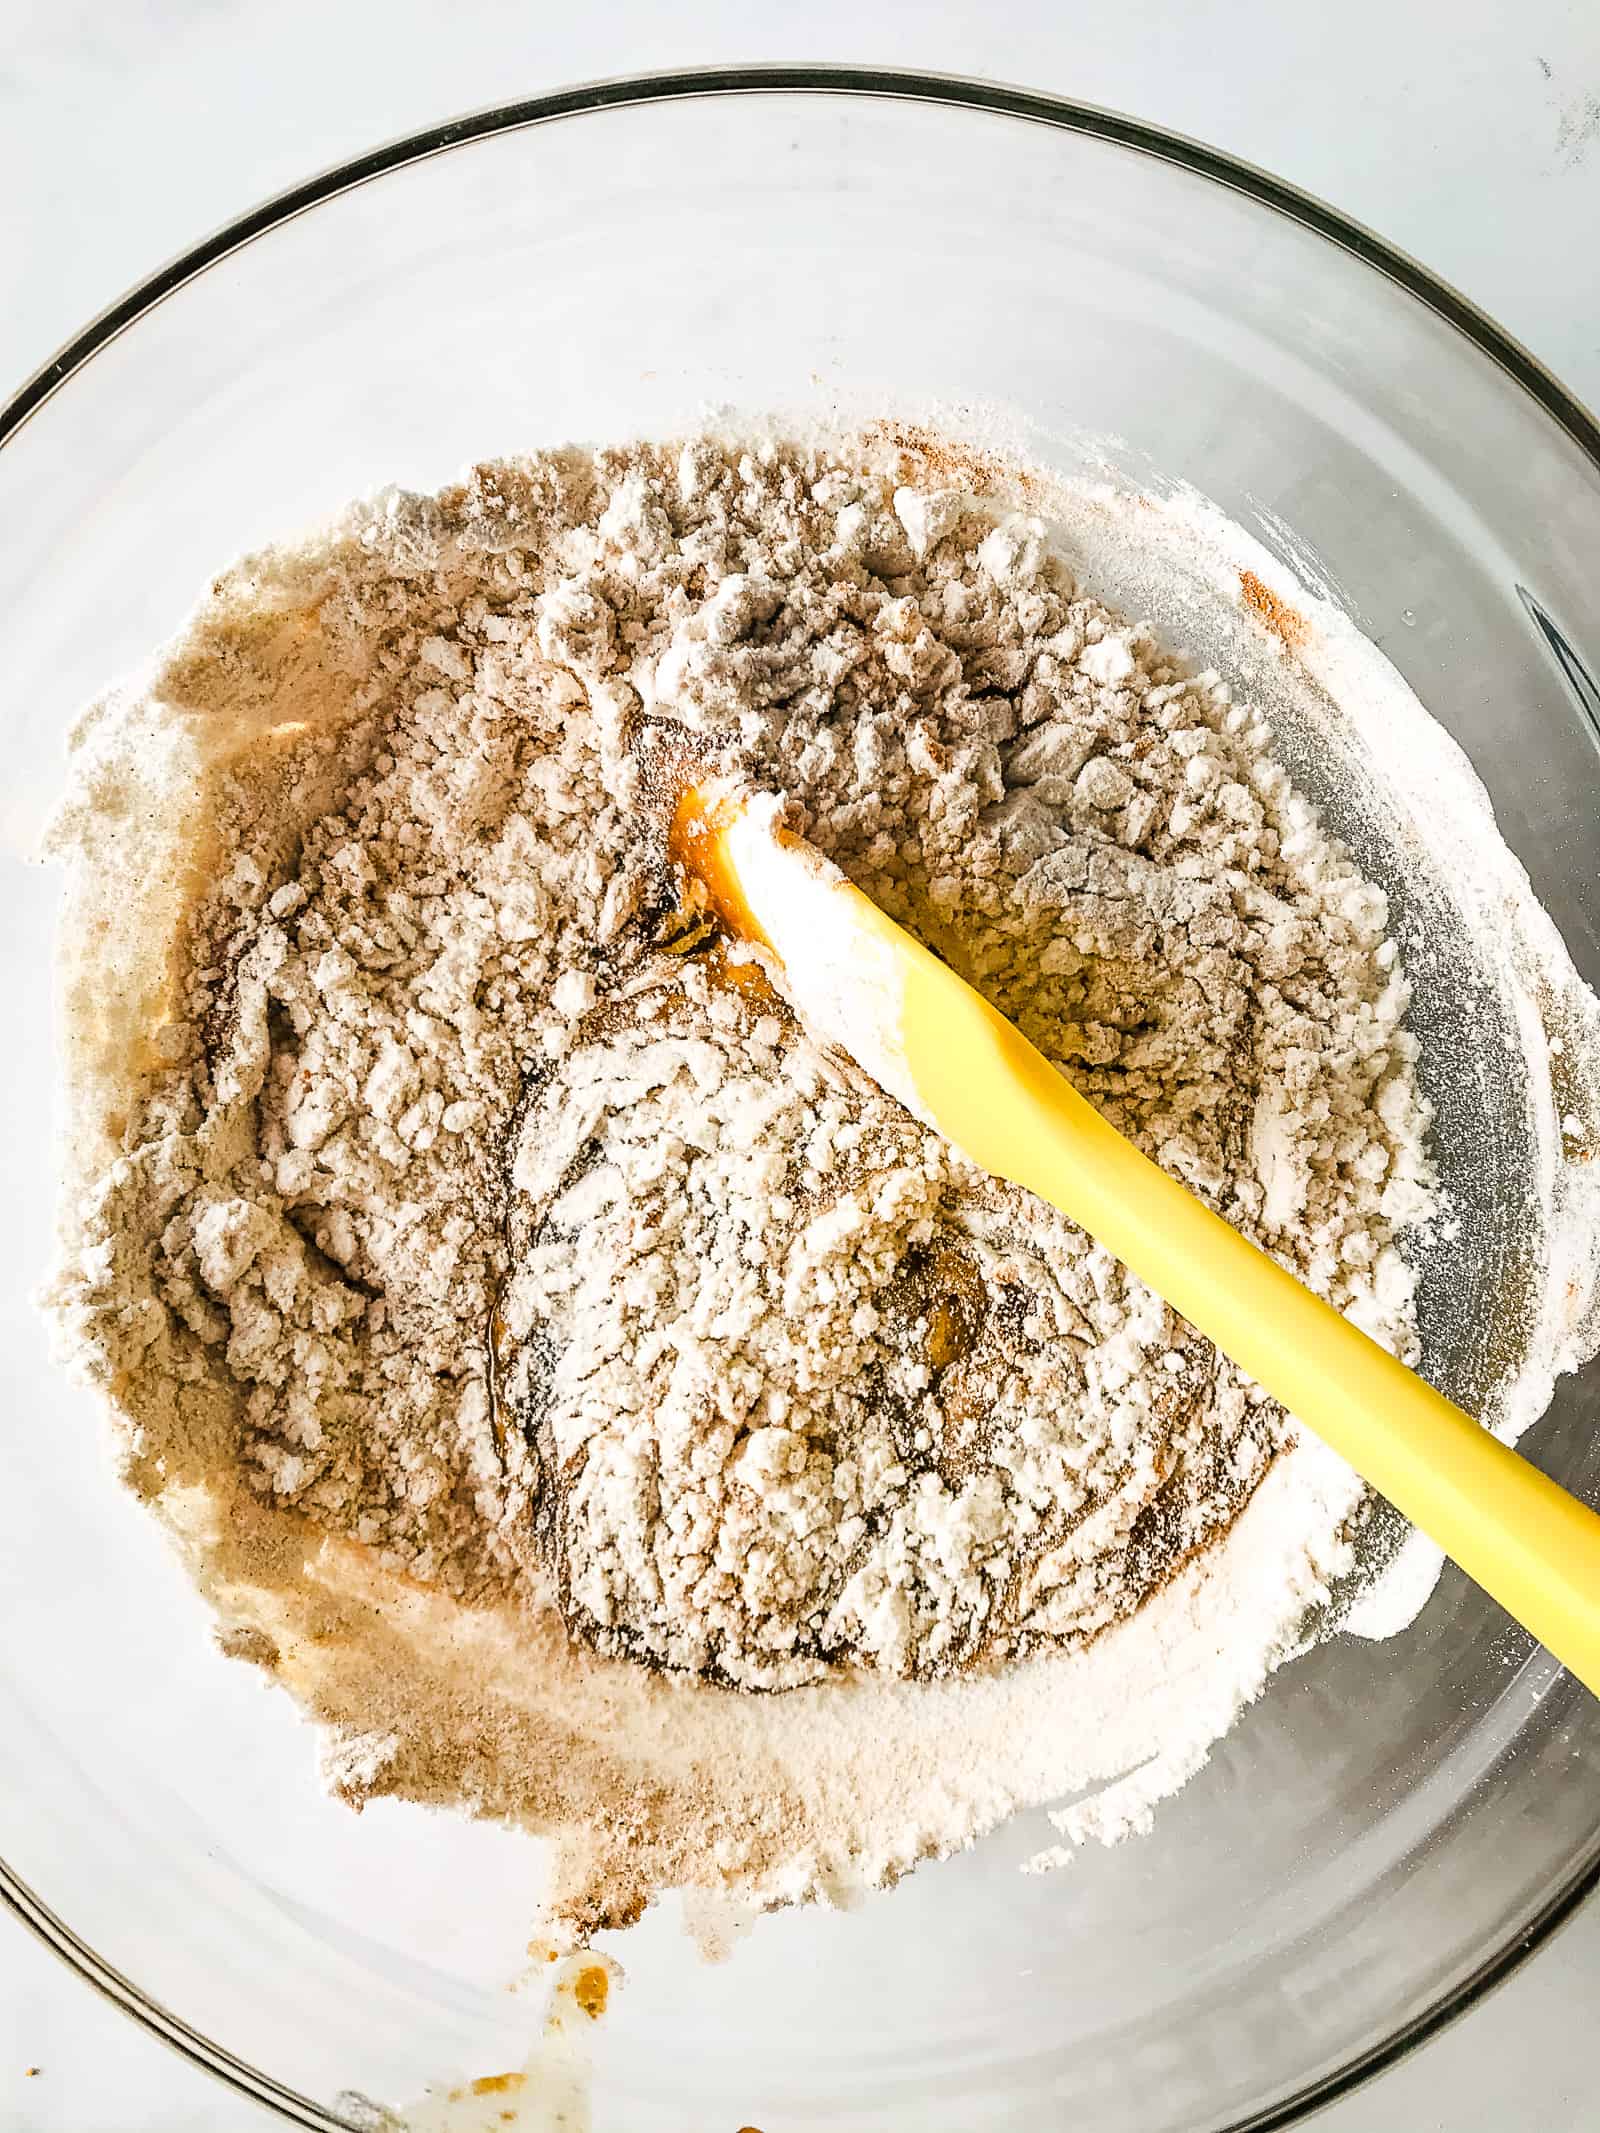 Gluten-free oatmeal cookie dough being mixed in a glass bowl. Gluten-free flour sits ontop of the butter and egg mixture. A yellow spatula is in the bowl.